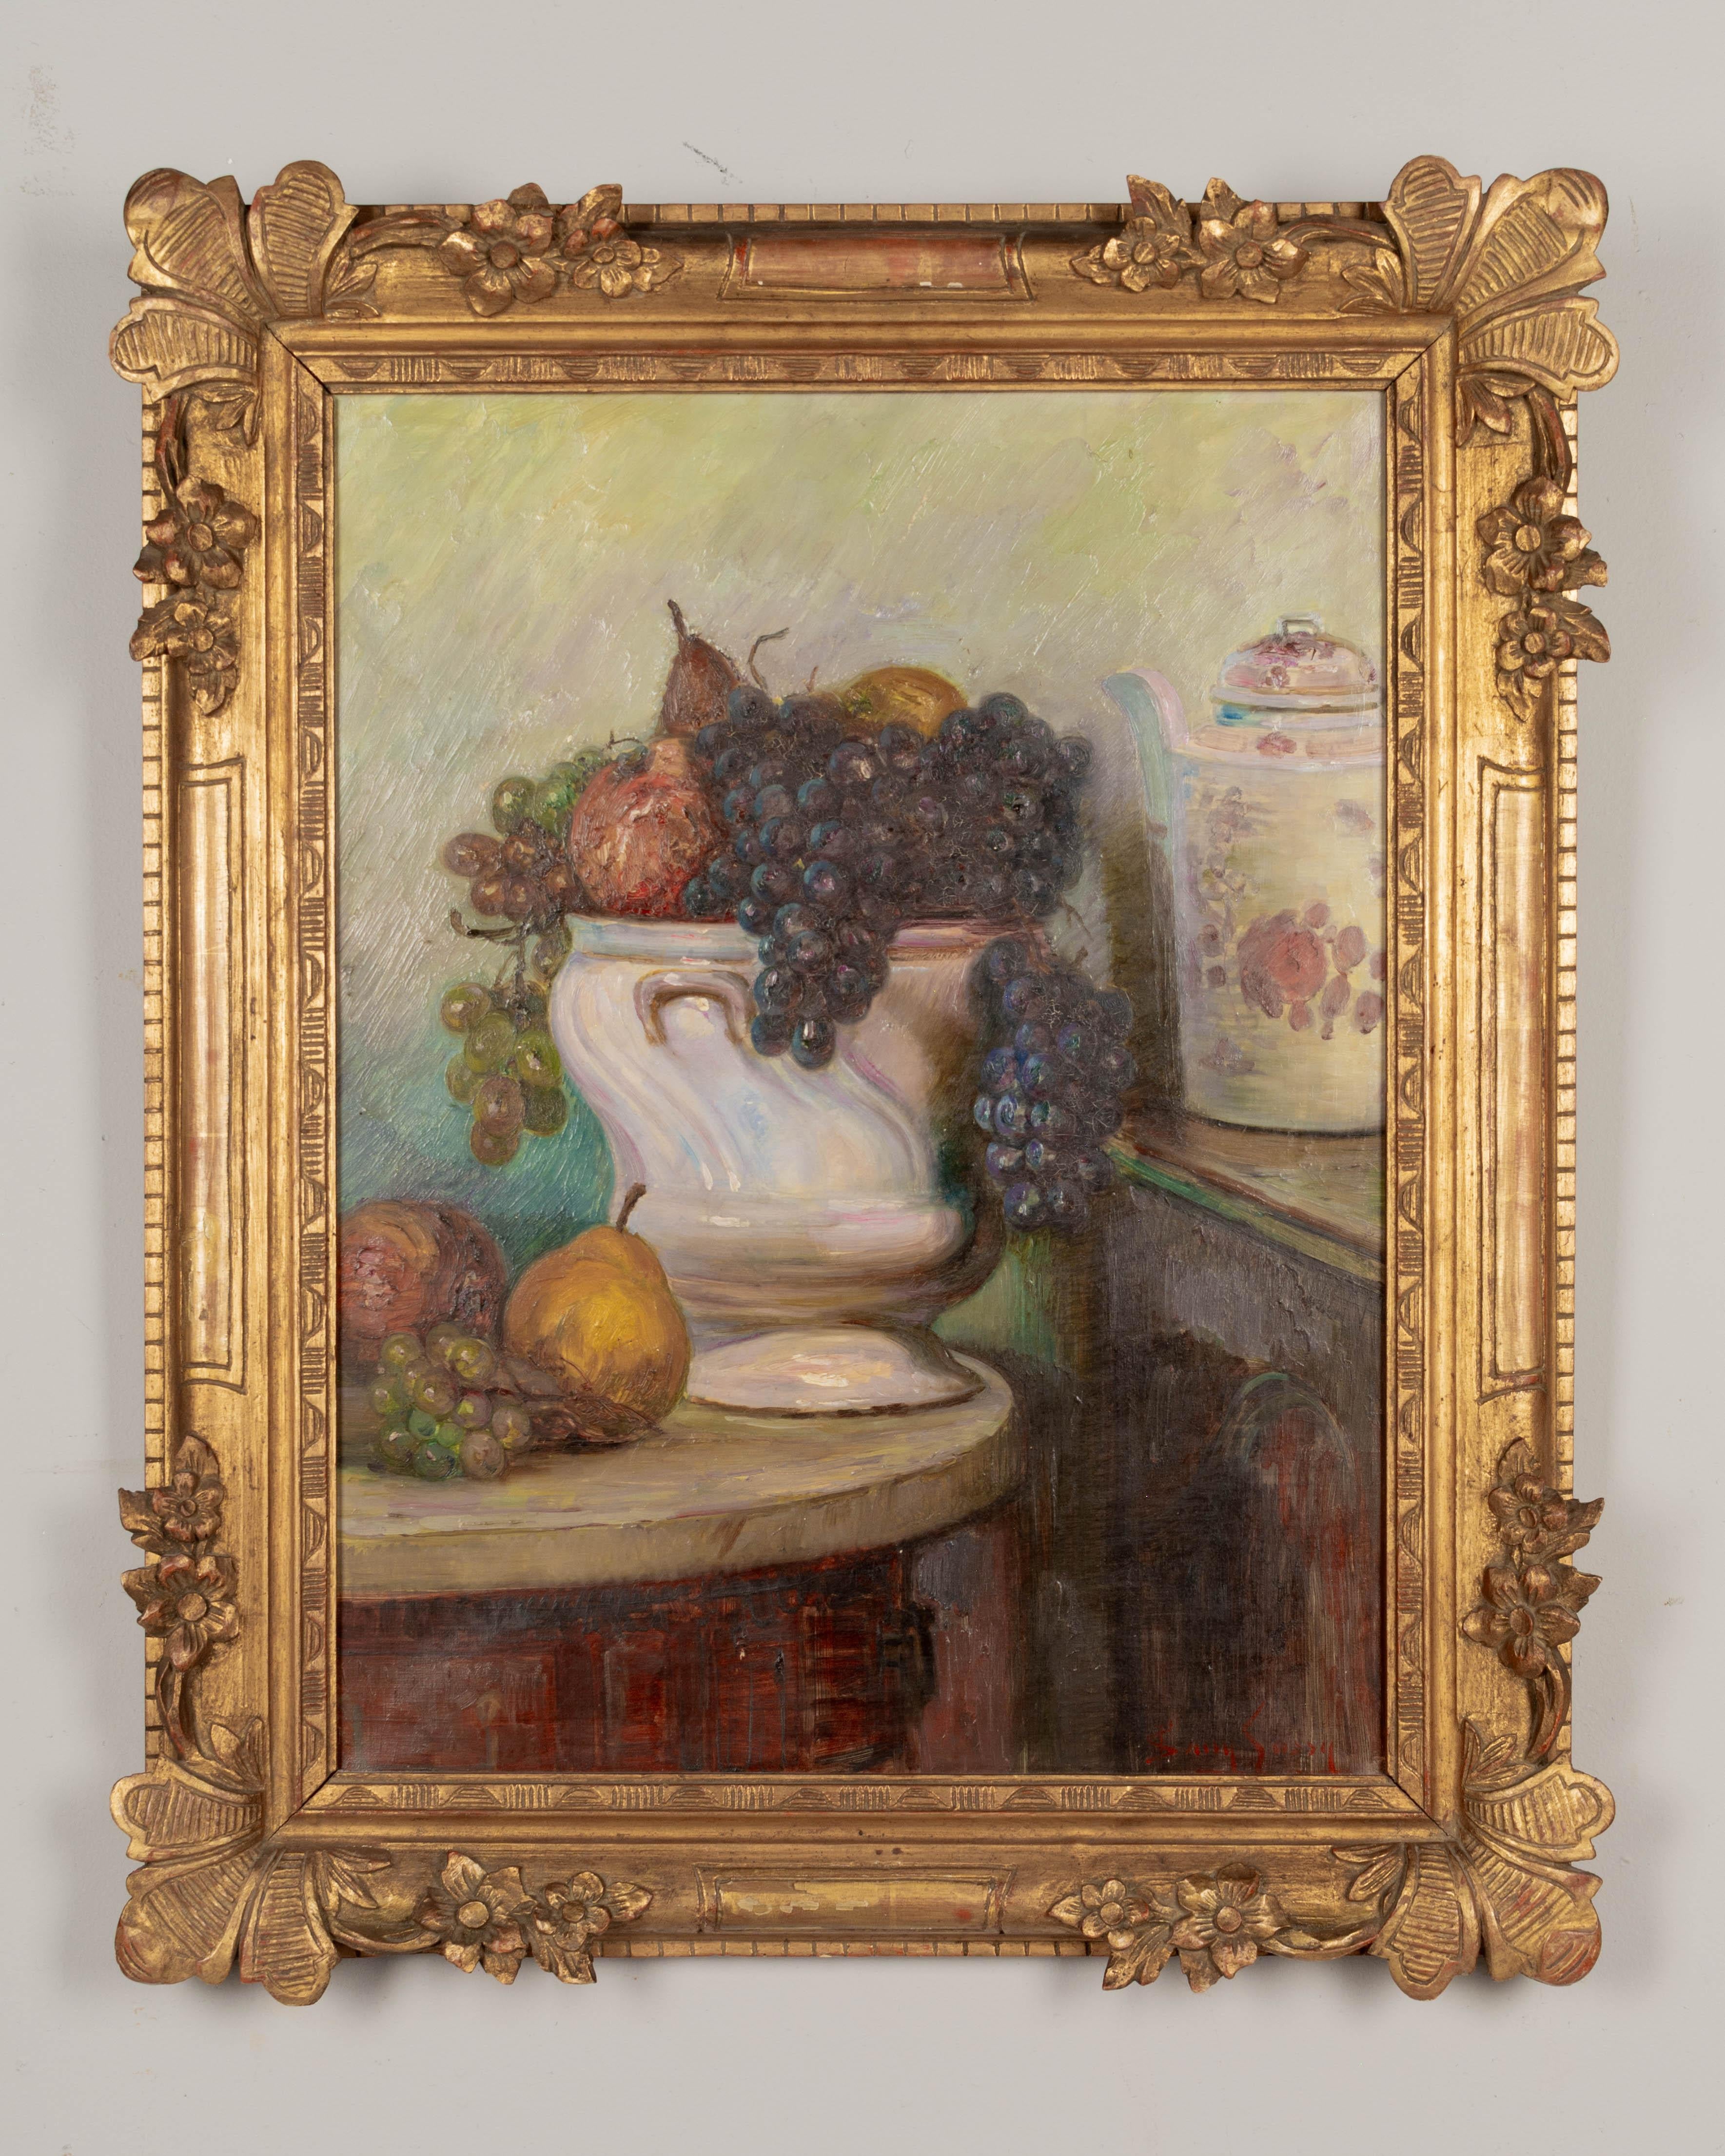 A French Impressionist style still life painting depicting a large porcelain bowl of fruit with purple and green grapes, pears and apples. Oil on canvas. Signed lower right: Sany Sassy.  Original carved gilded wood frame. In good condition with